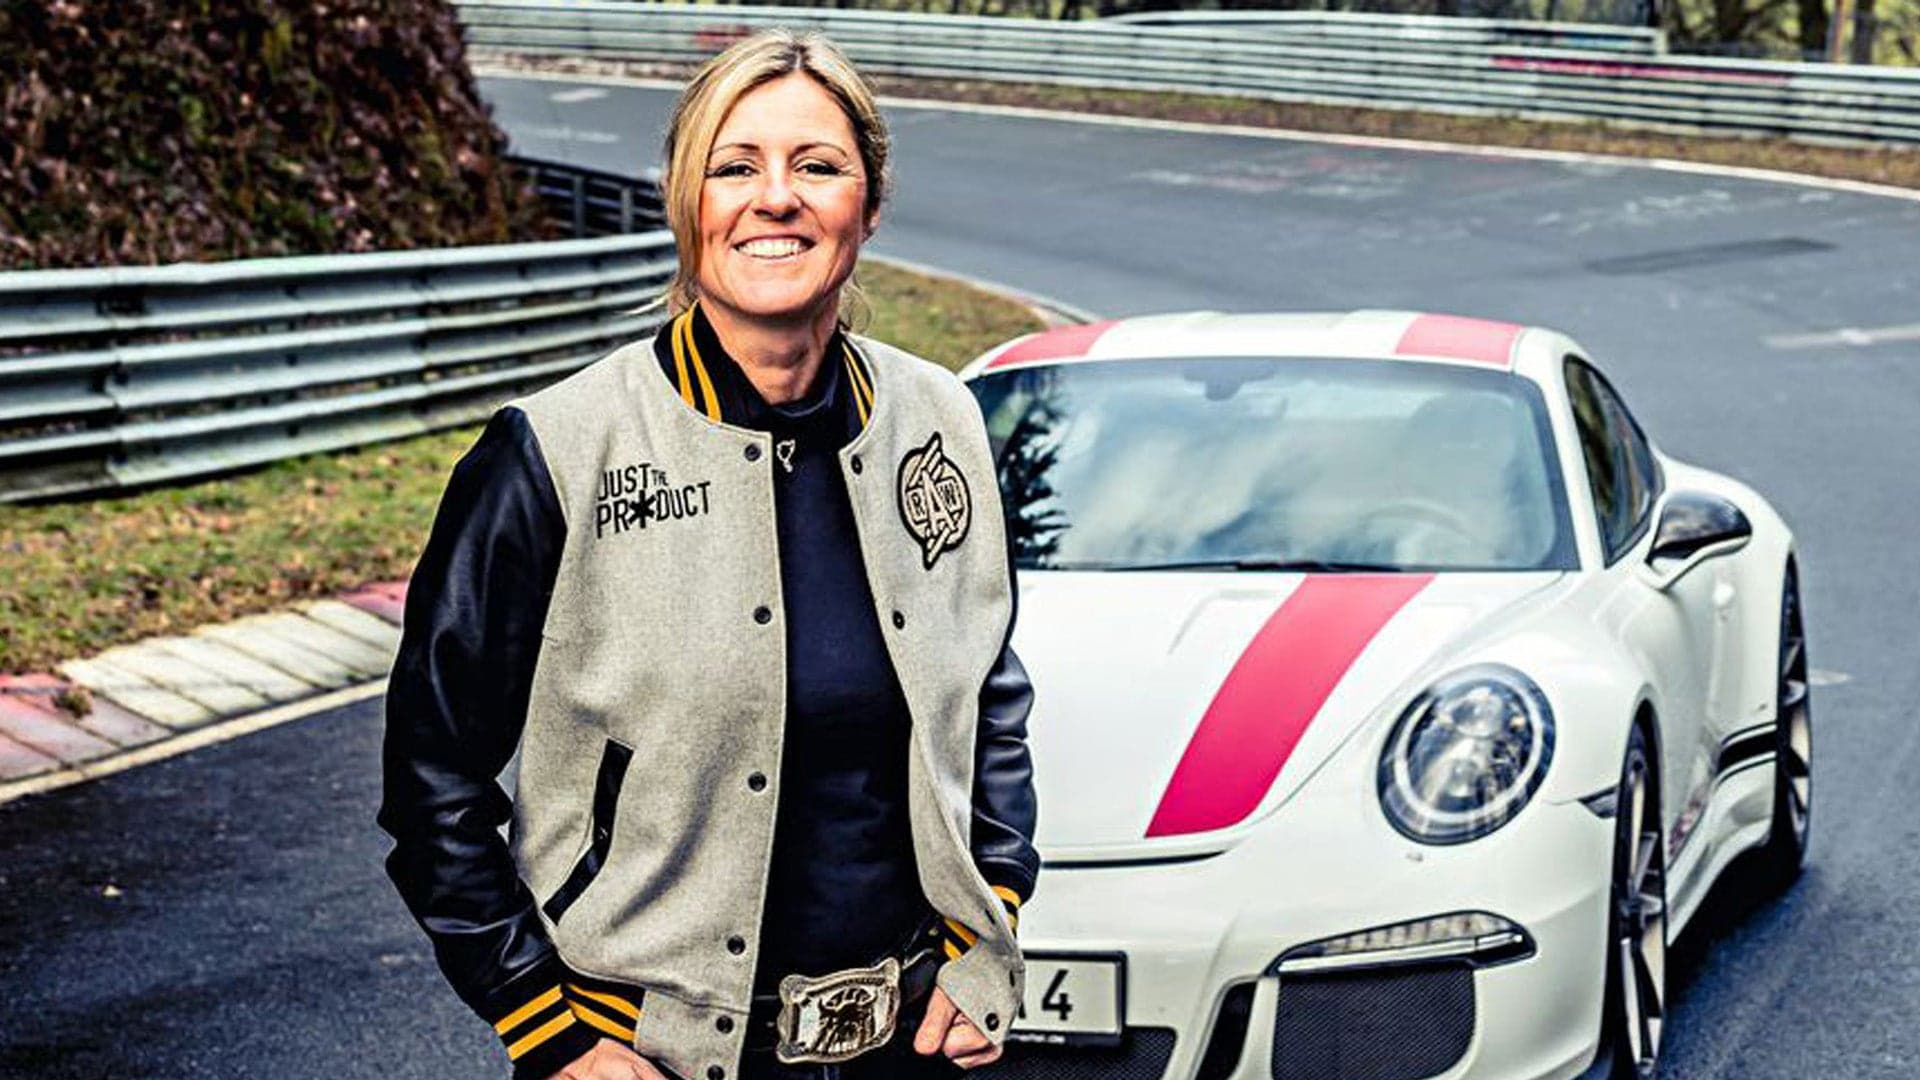 Turn One of the Nurburgring Nordschleife Named for Sabine Schmitz